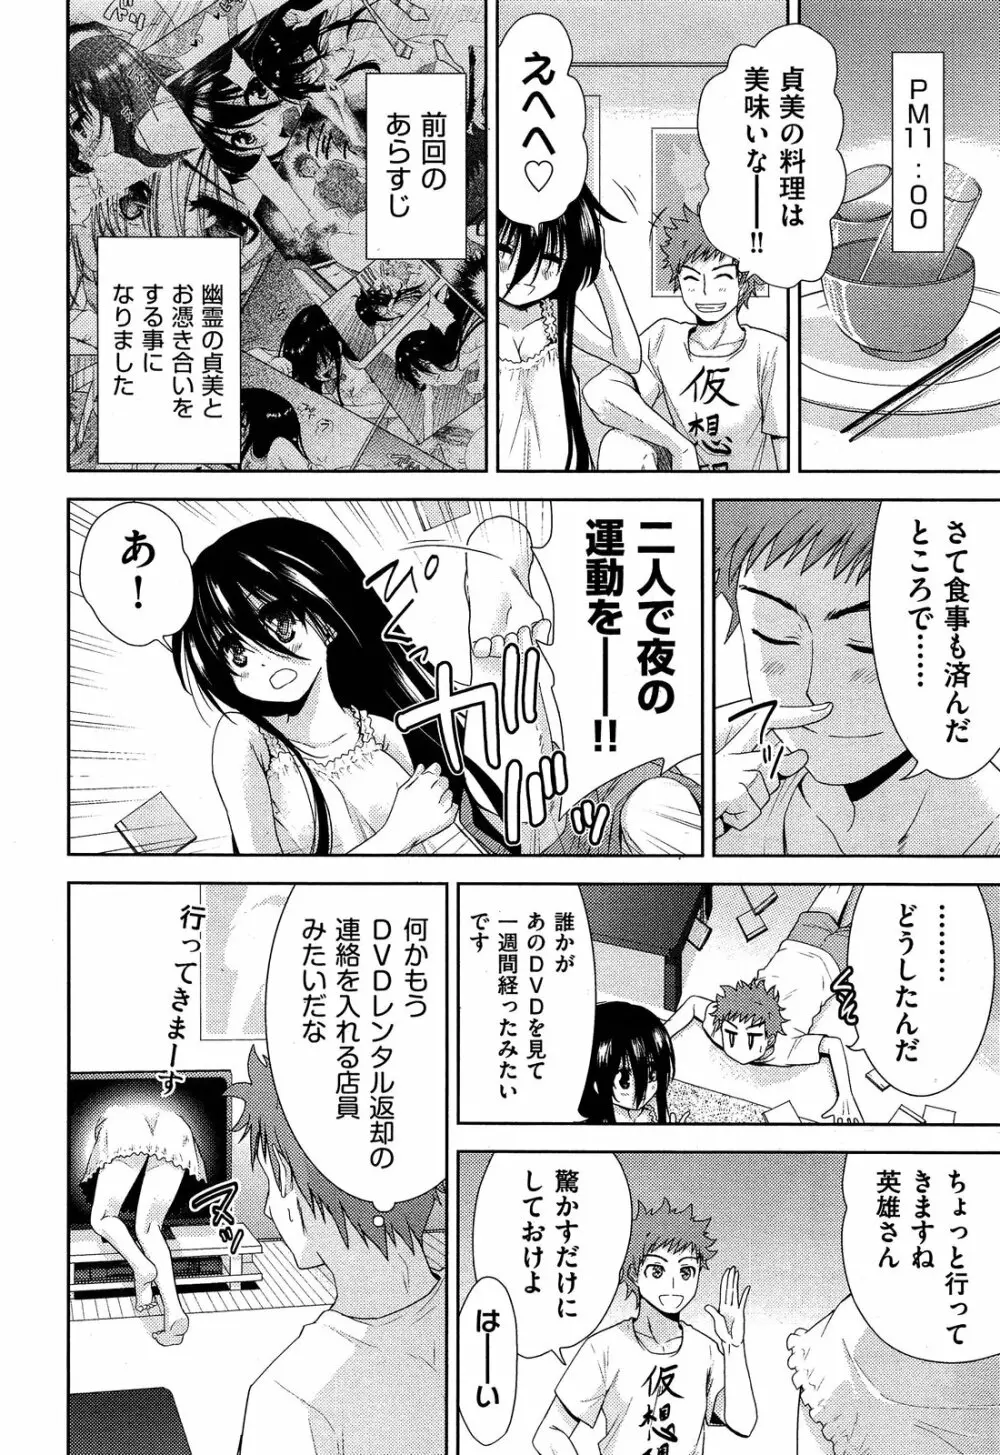 Two dimensions girlfriend Ch.1-4 26ページ